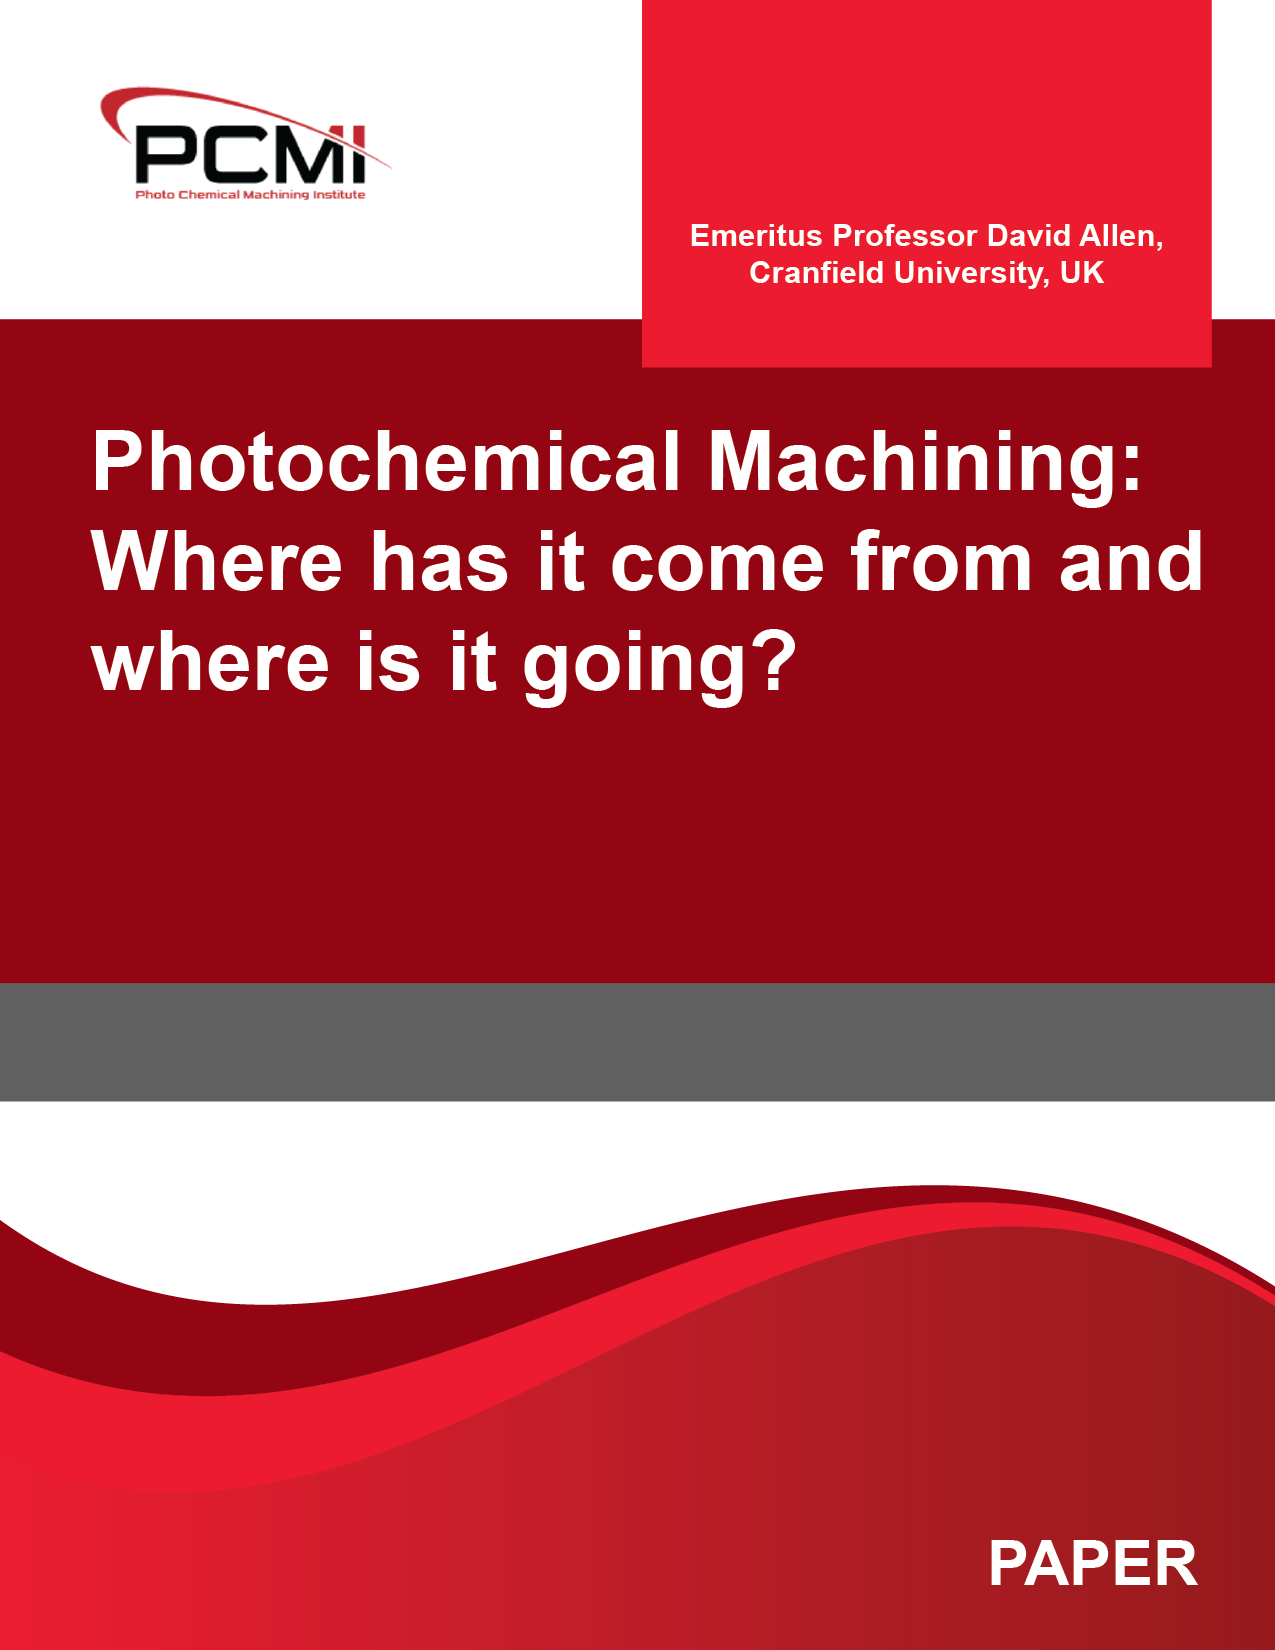 Photochemical Machining: Where has it come from and where is it going?